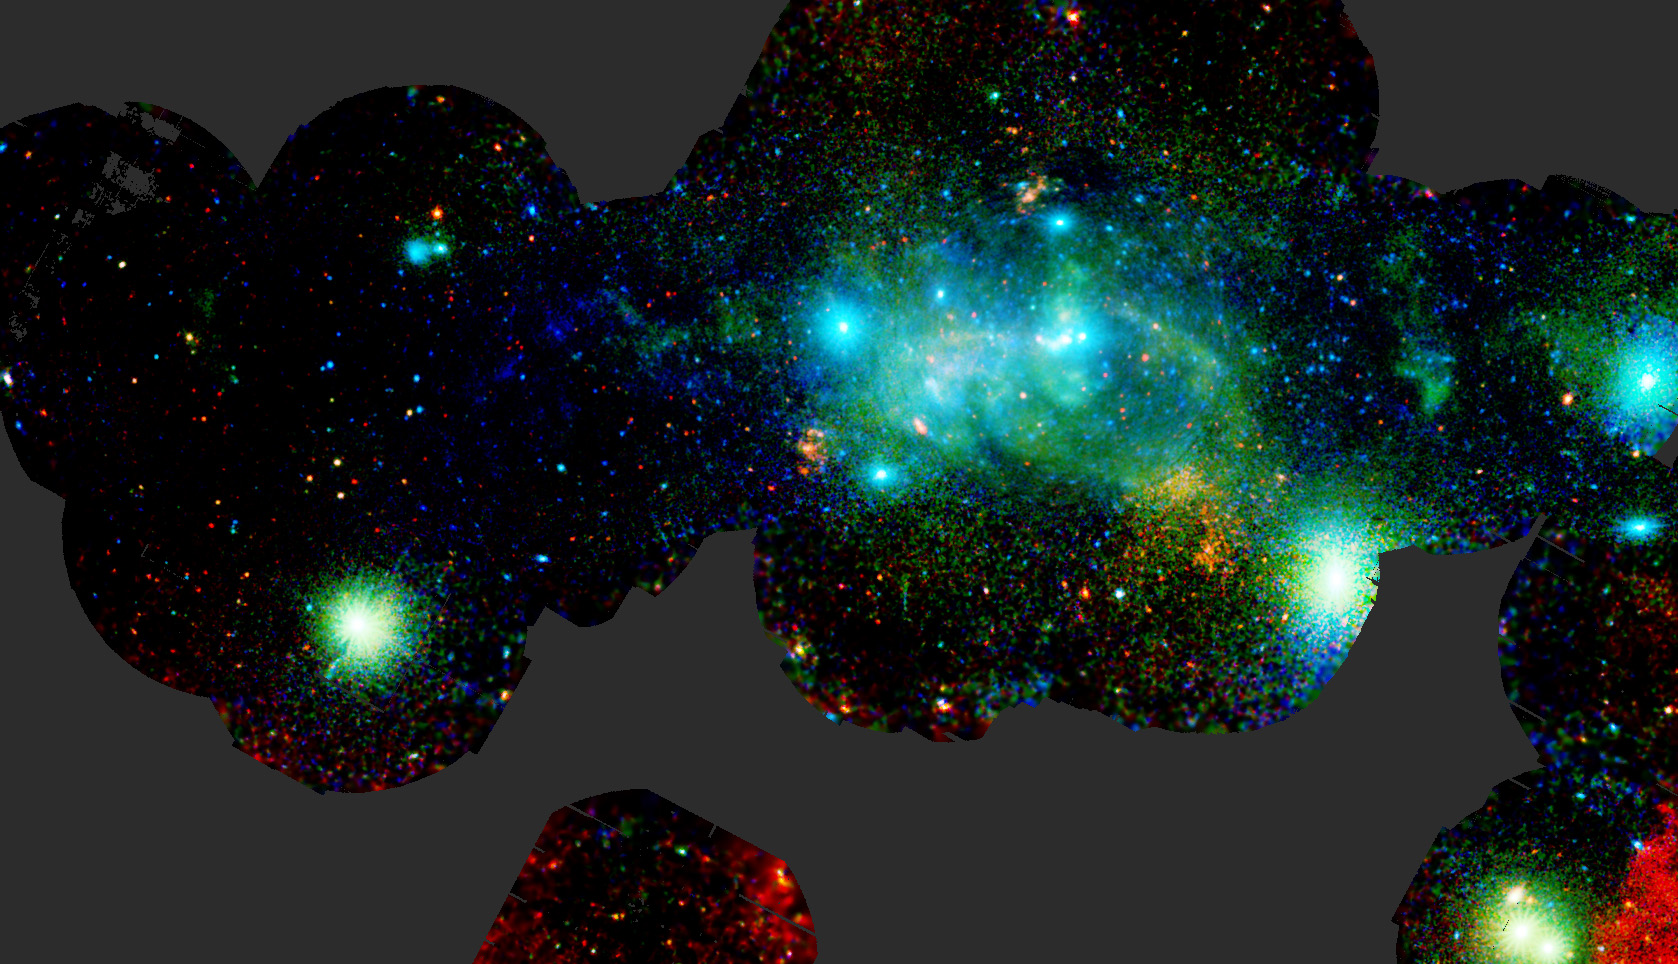 The central regions of our galaxy, the Milky Way, seen in X-rays